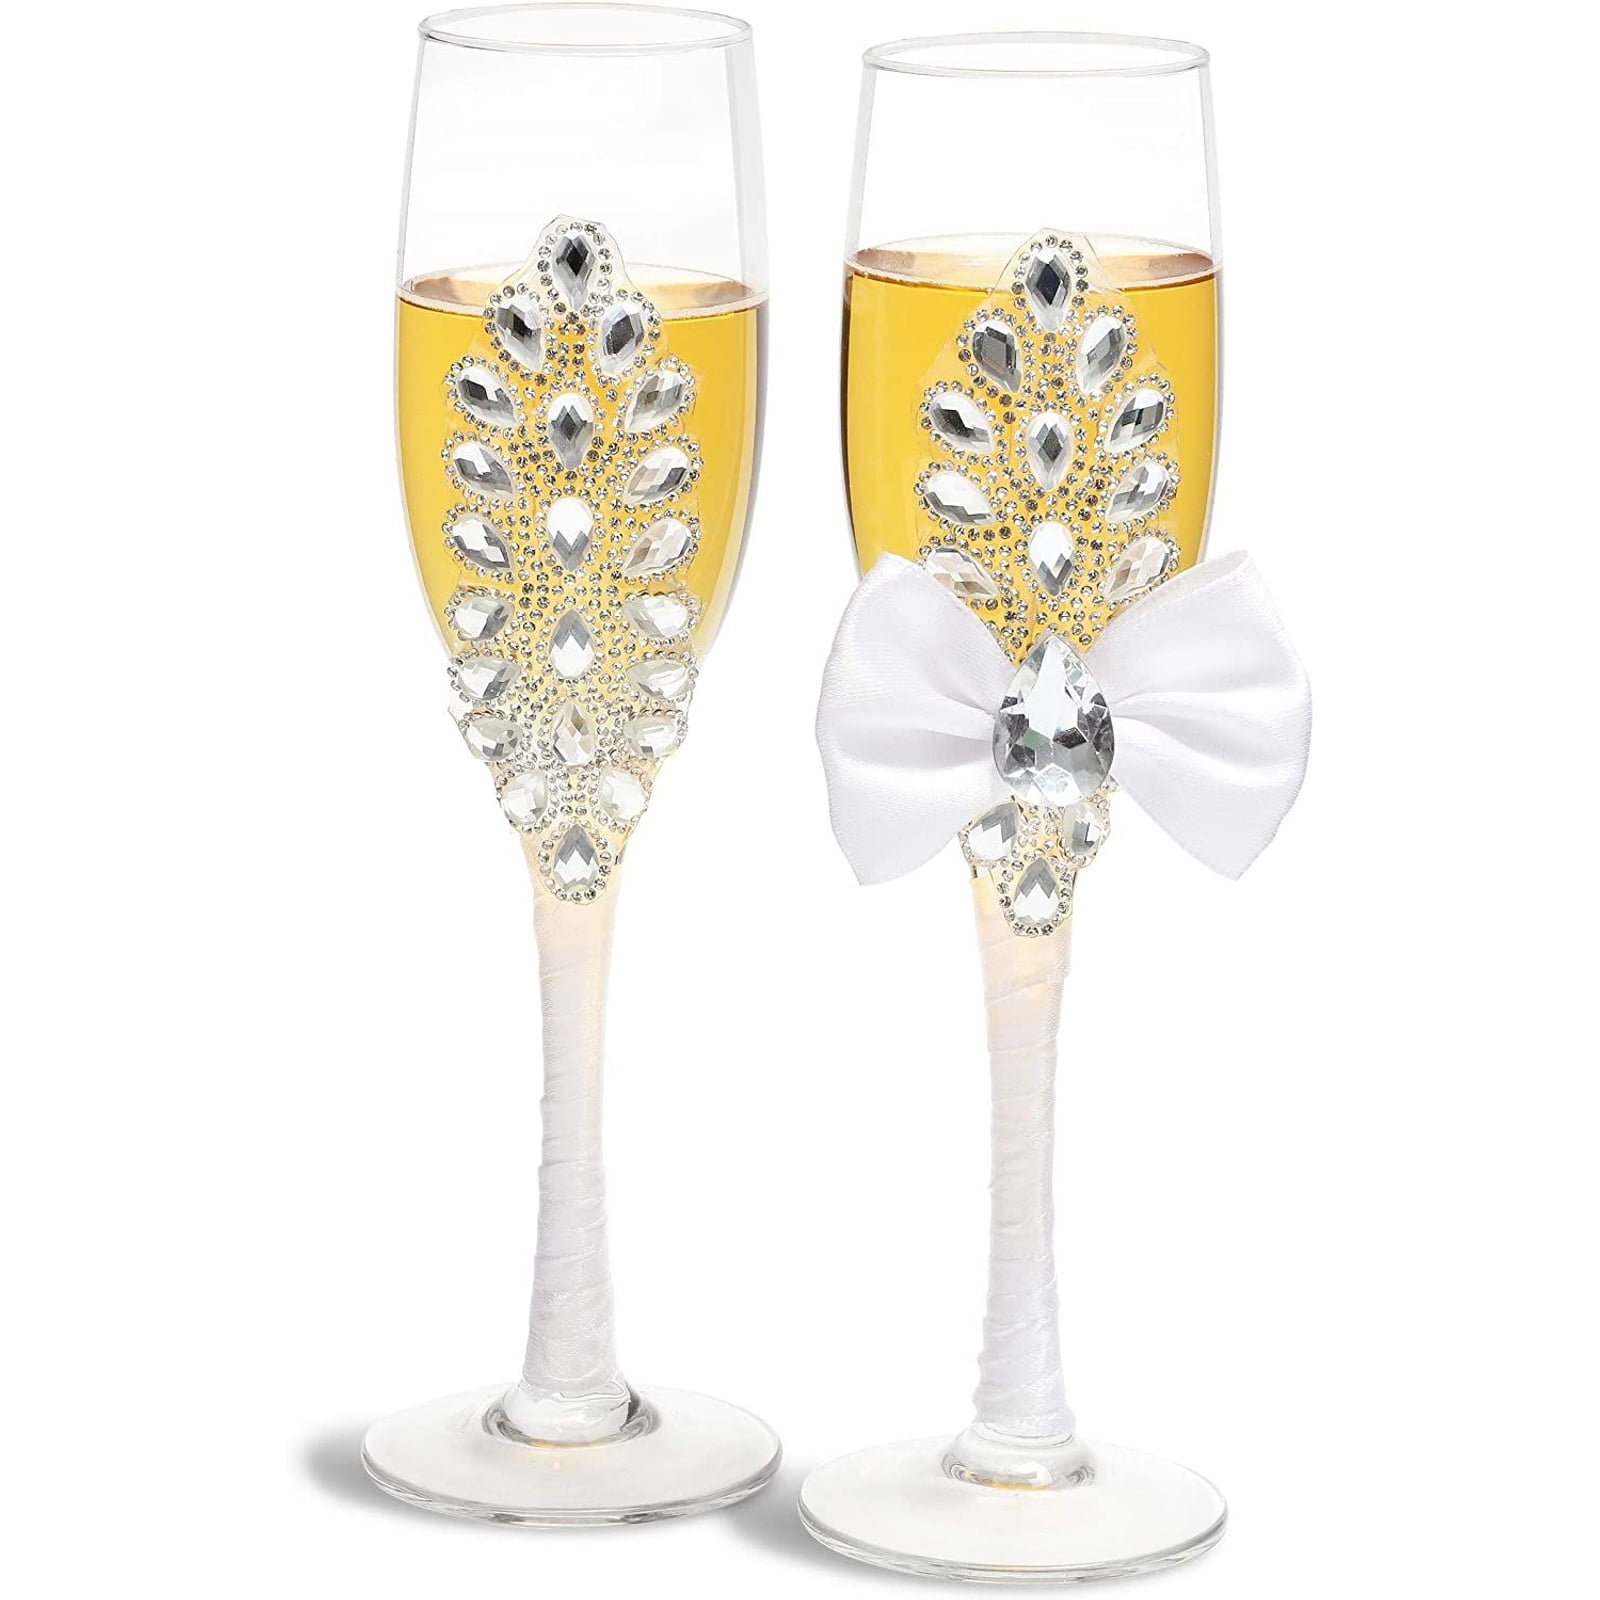 Gold Plated Toasting Flutes Champagne Glasses Wedding Toast Glassware 